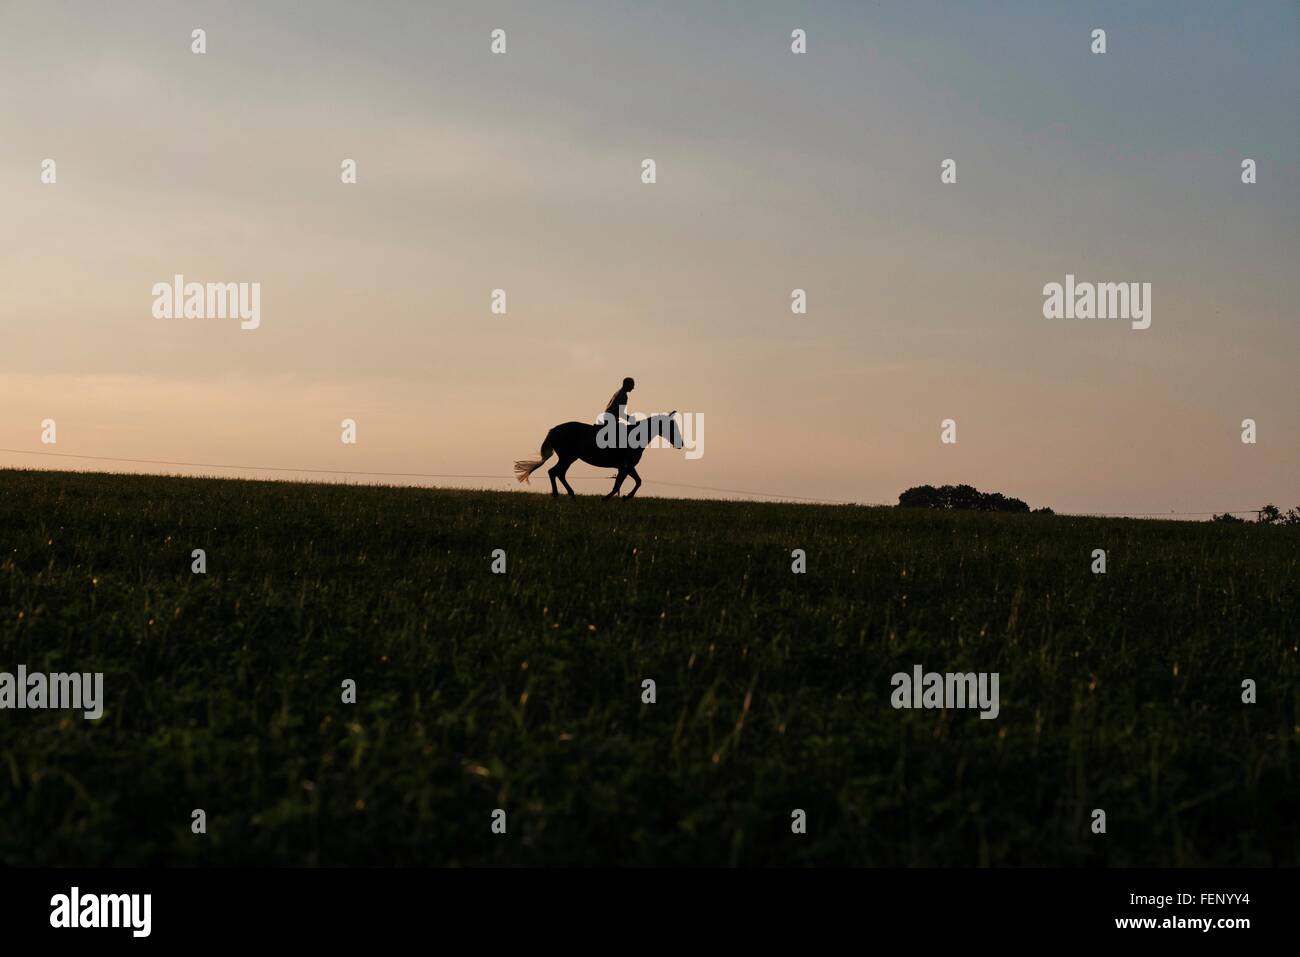 Silhouetted view of woman riding horse in field Stock Photo